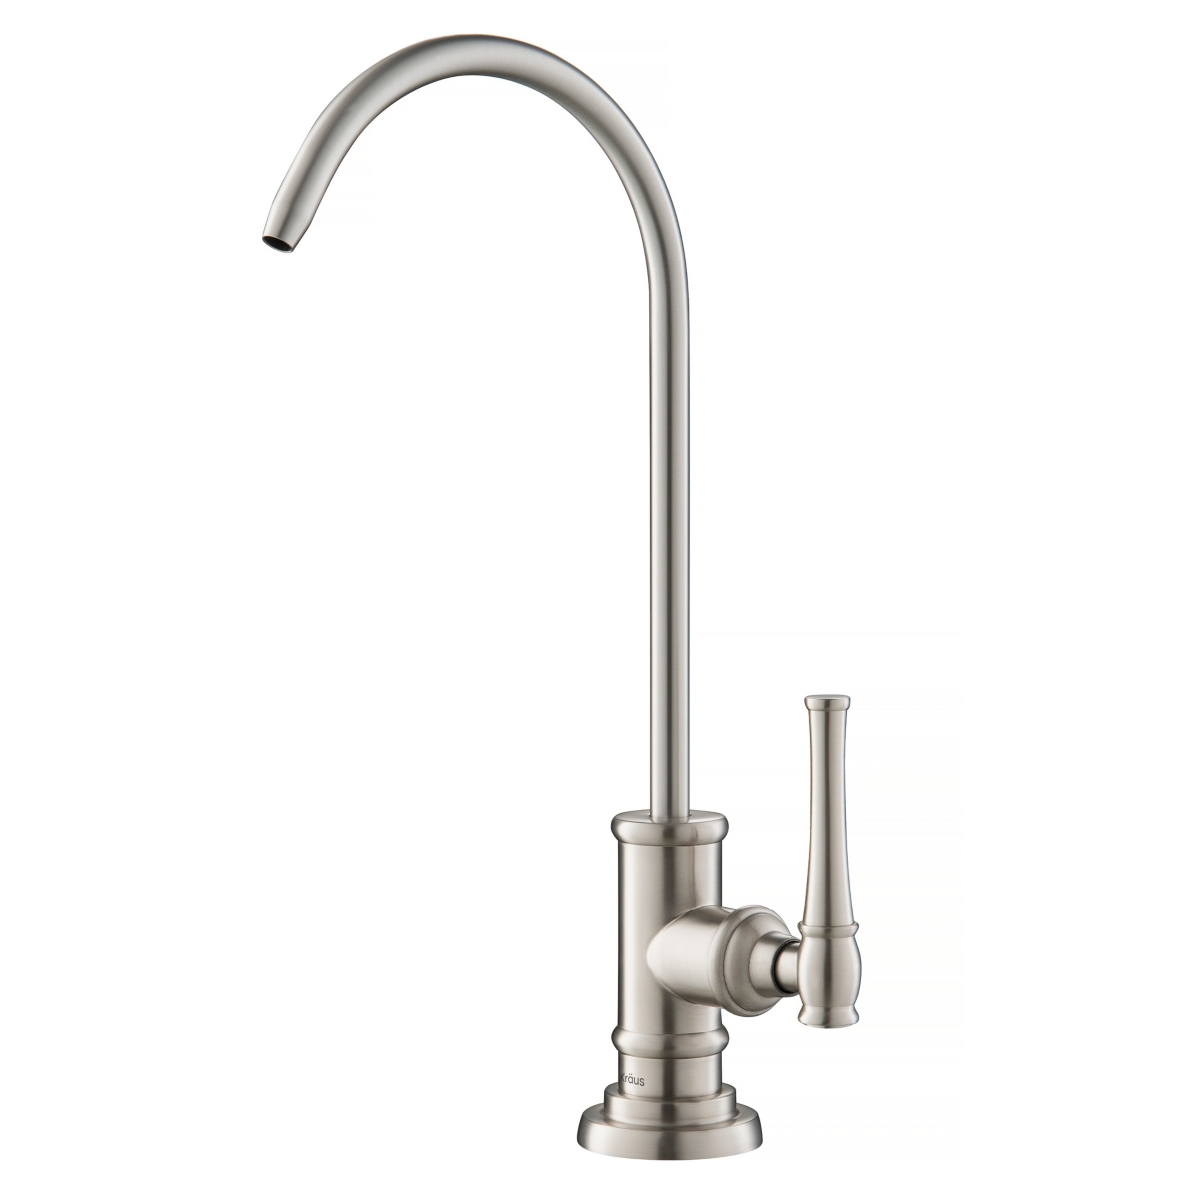 Allyn 100% Lead-Free Kitchen Water Filter Faucet - Brushed gold